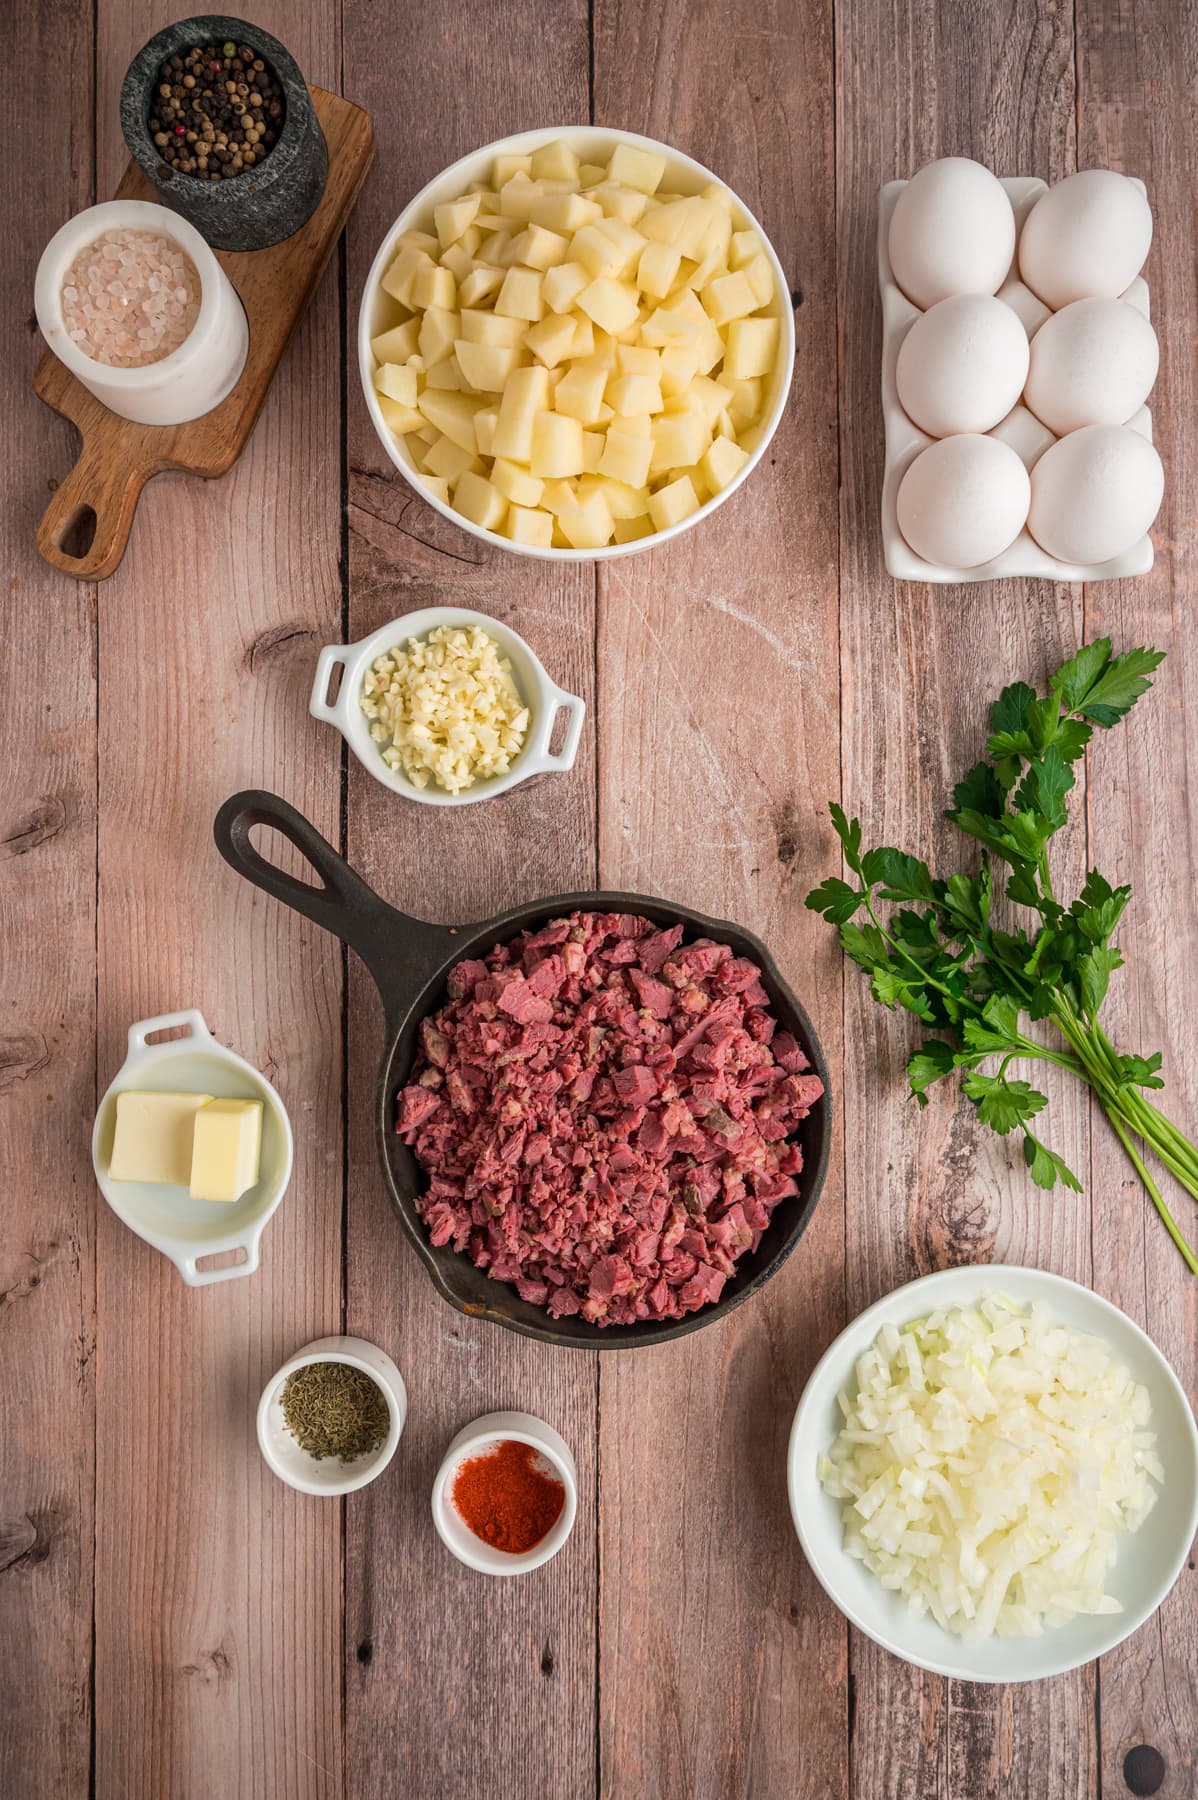 Ingredients for a corned beef hash recipe.